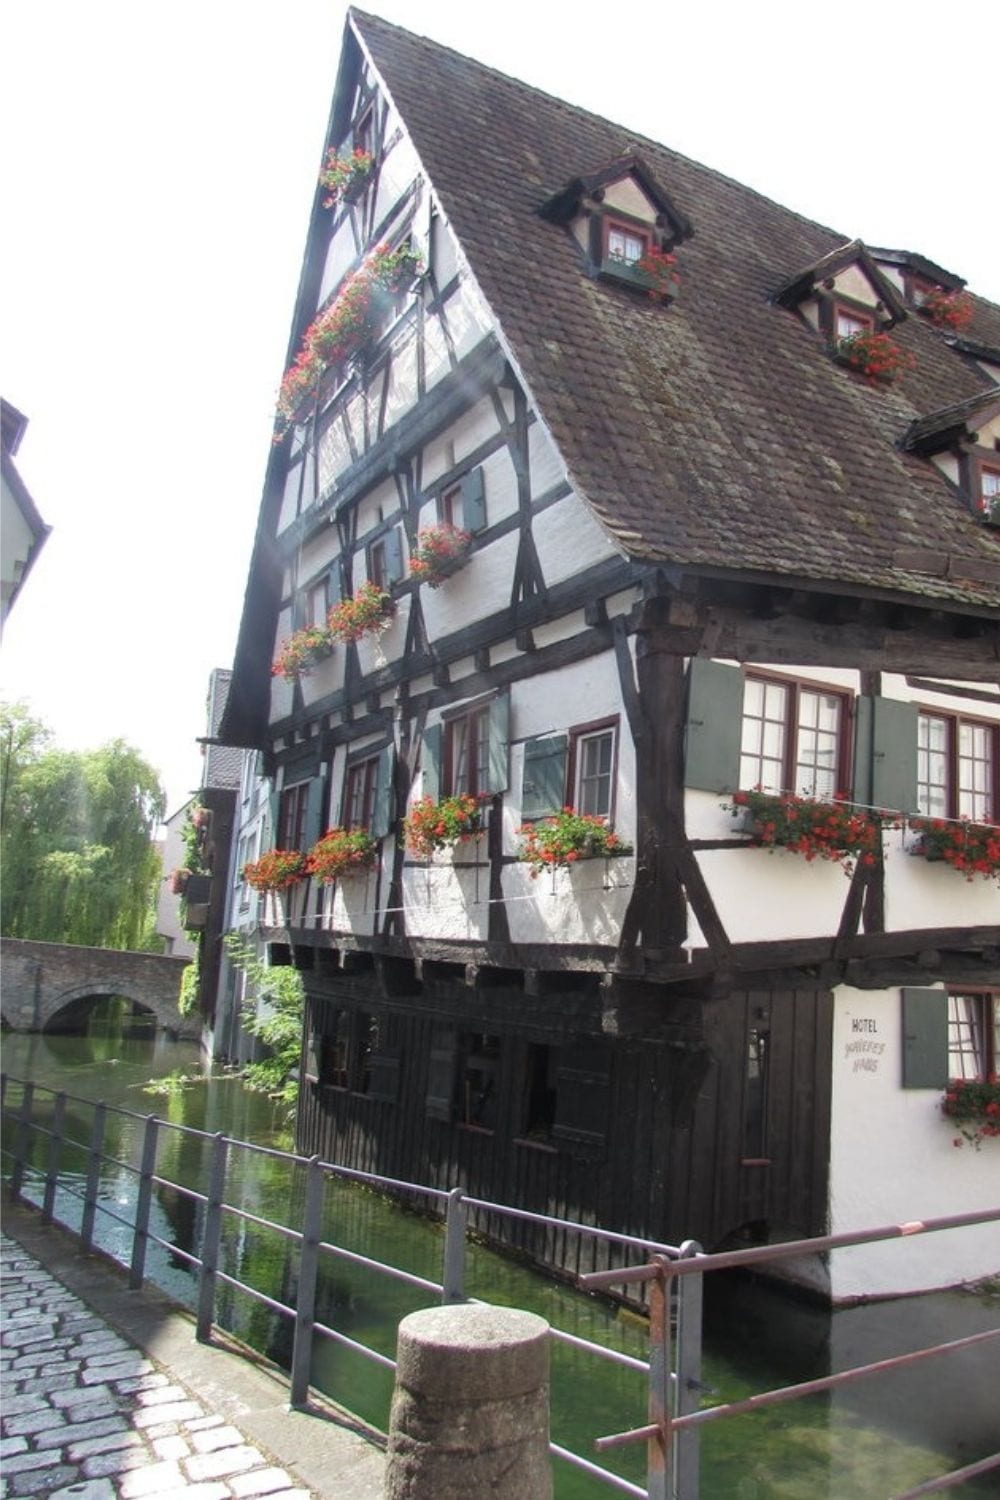 Strolling around the old quarters in Ulm Germany